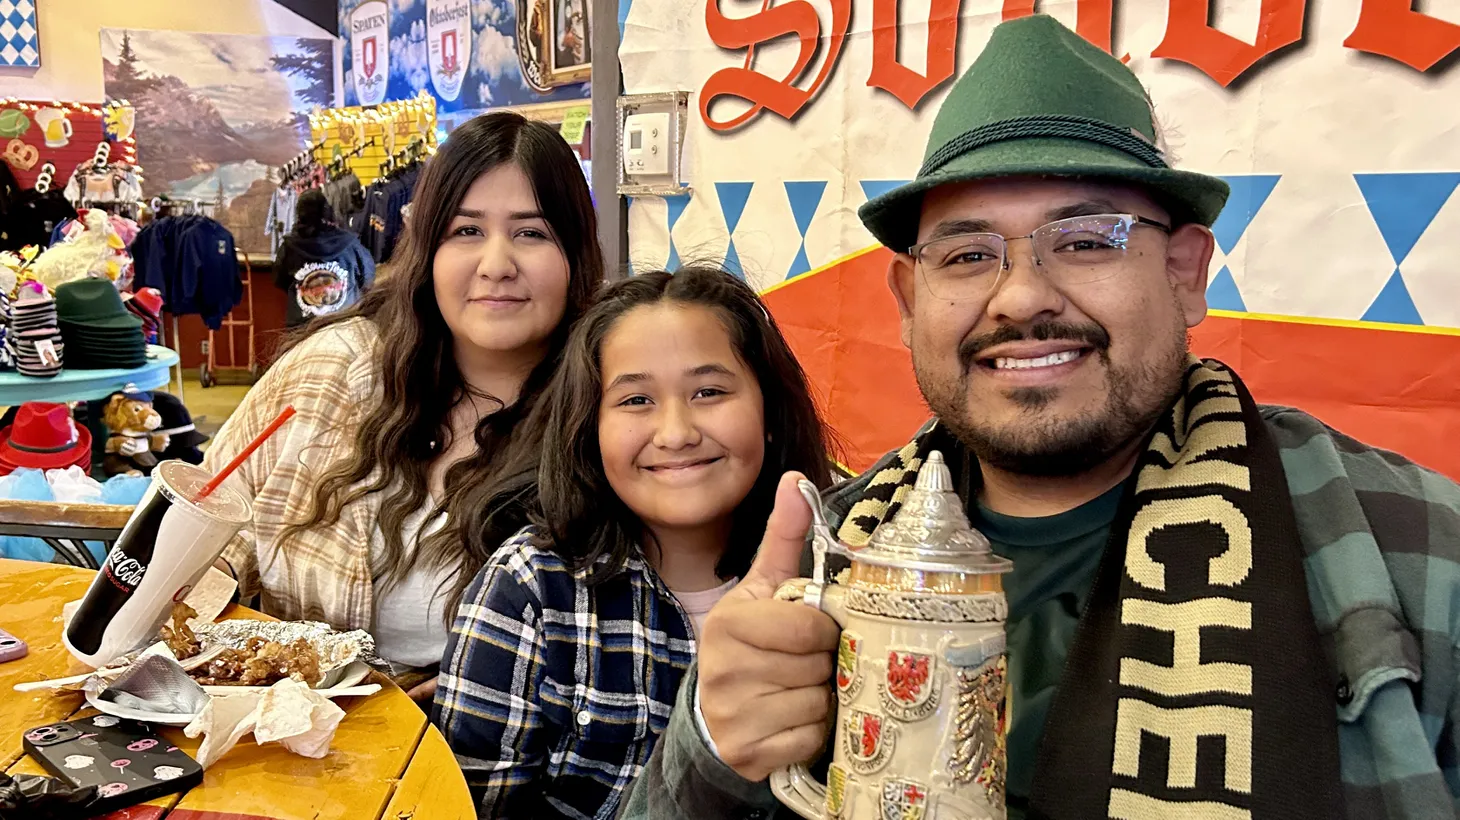 (L to R) Veronica, Carissa and Juan Moneada have been attending Big Bear’s Oktoberfest for three years.